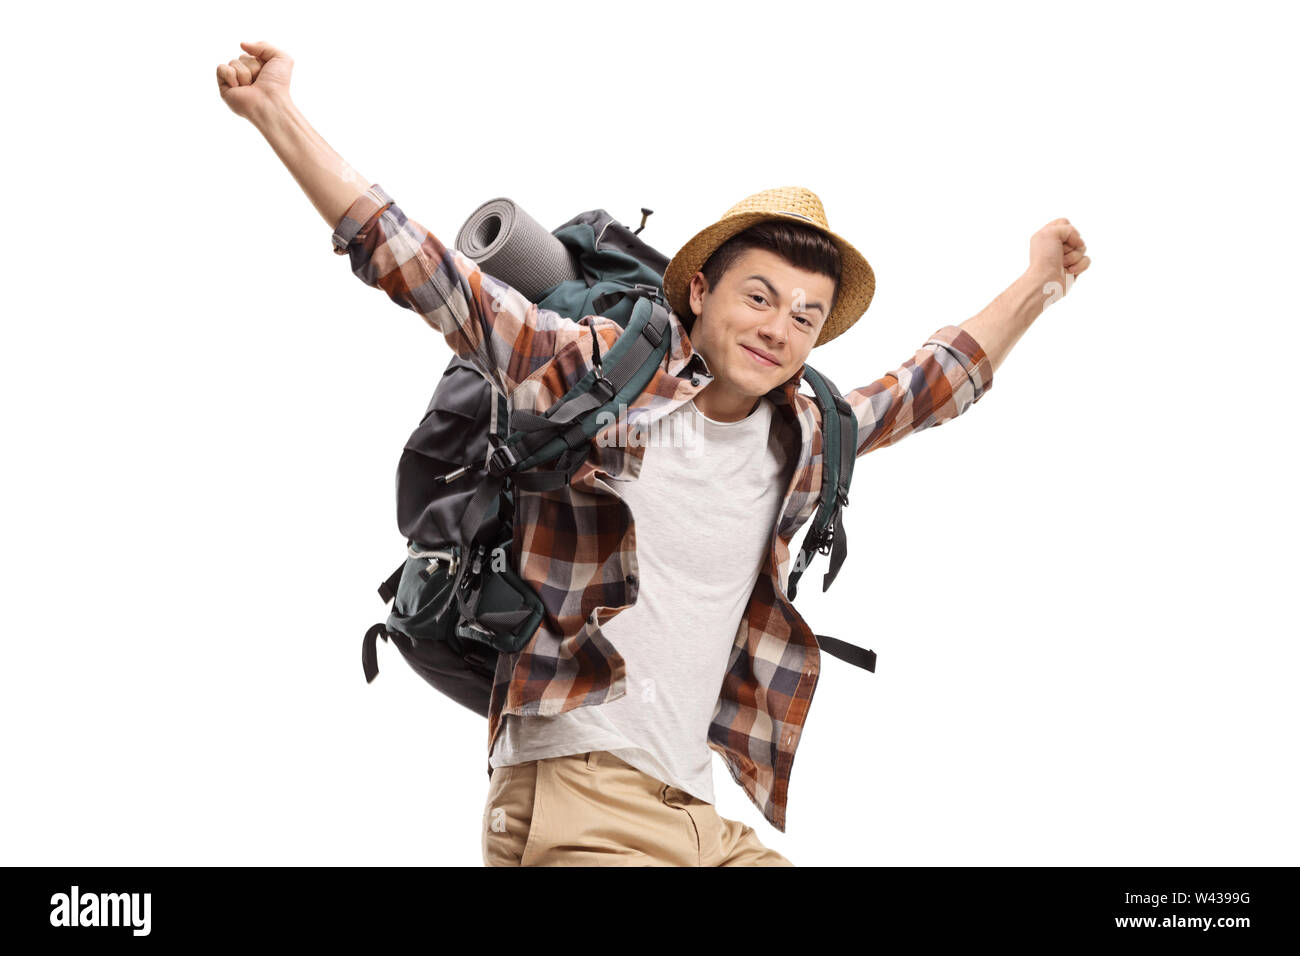 Young male backpacker jumping and gesturing happiness isolated on white background Stock Photo